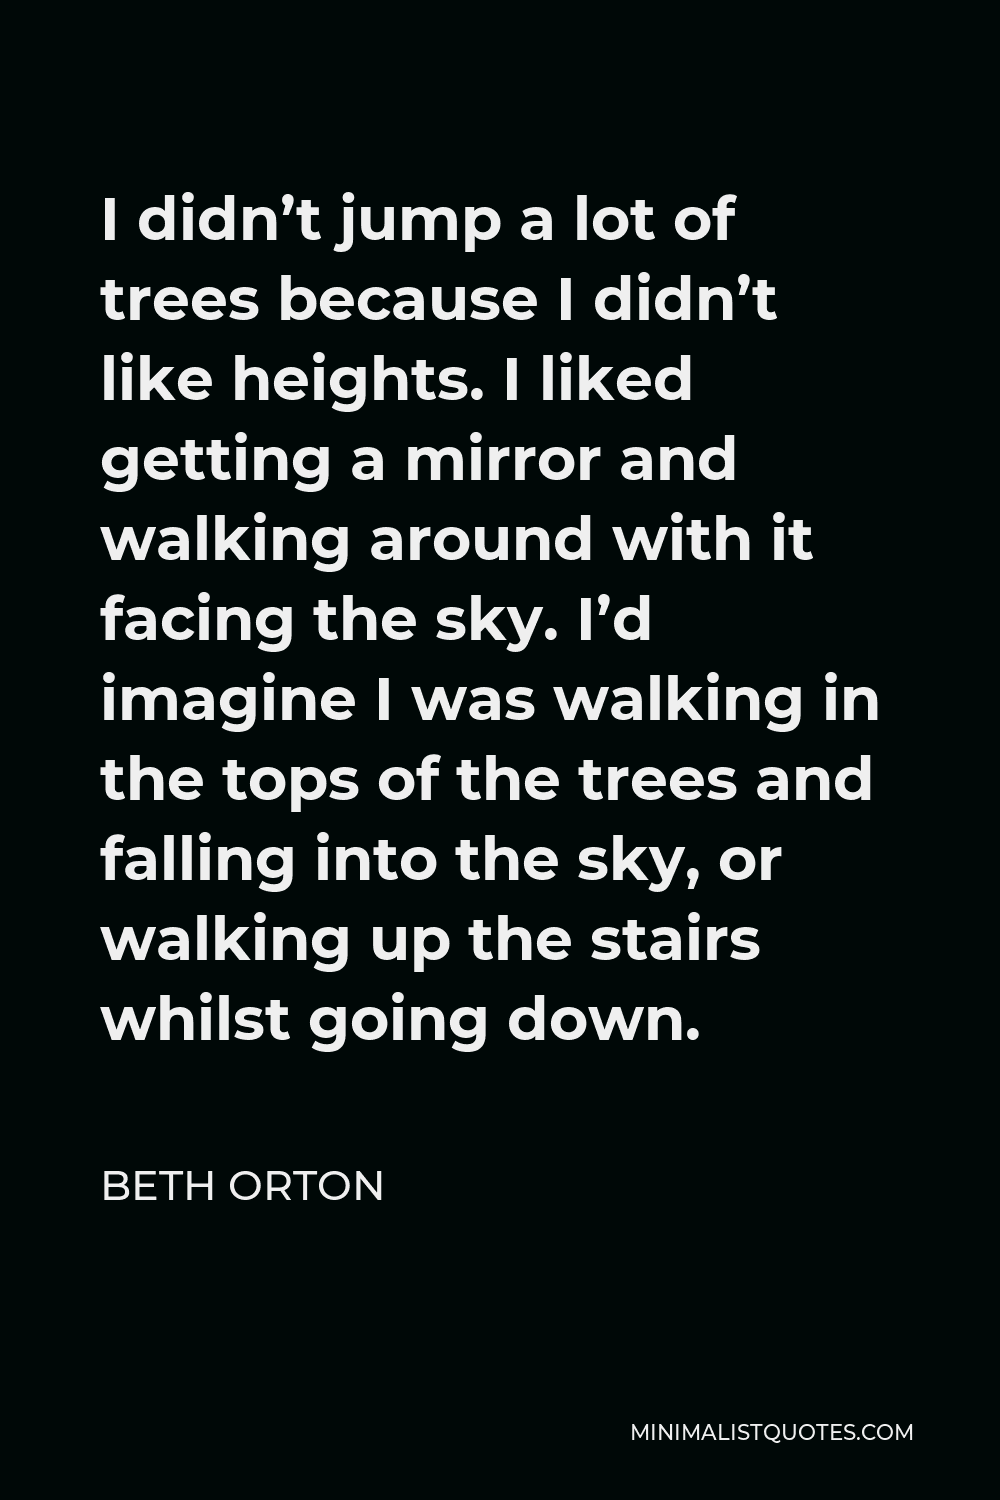 Beth Orton Quote - I didn’t jump a lot of trees because I didn’t like heights. I liked getting a mirror and walking around with it facing the sky. I’d imagine I was walking in the tops of the trees and falling into the sky, or walking up the stairs whilst going down.